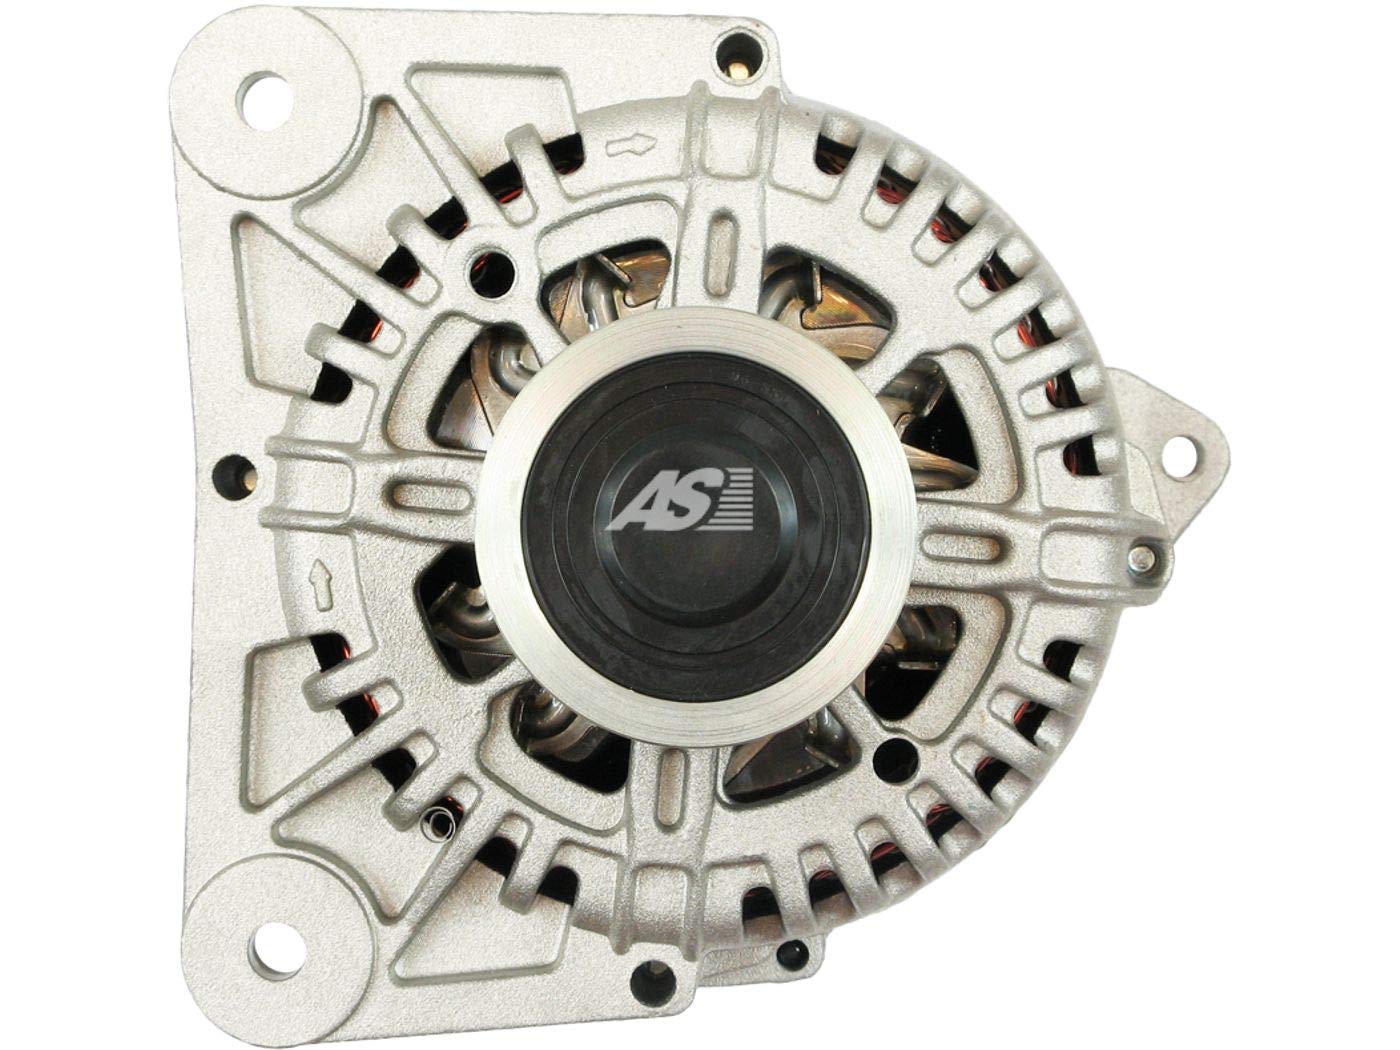 Brand new AS-PL Alternator with INA Free Wheel Pulley - A3052(P-INA) von AS-PL